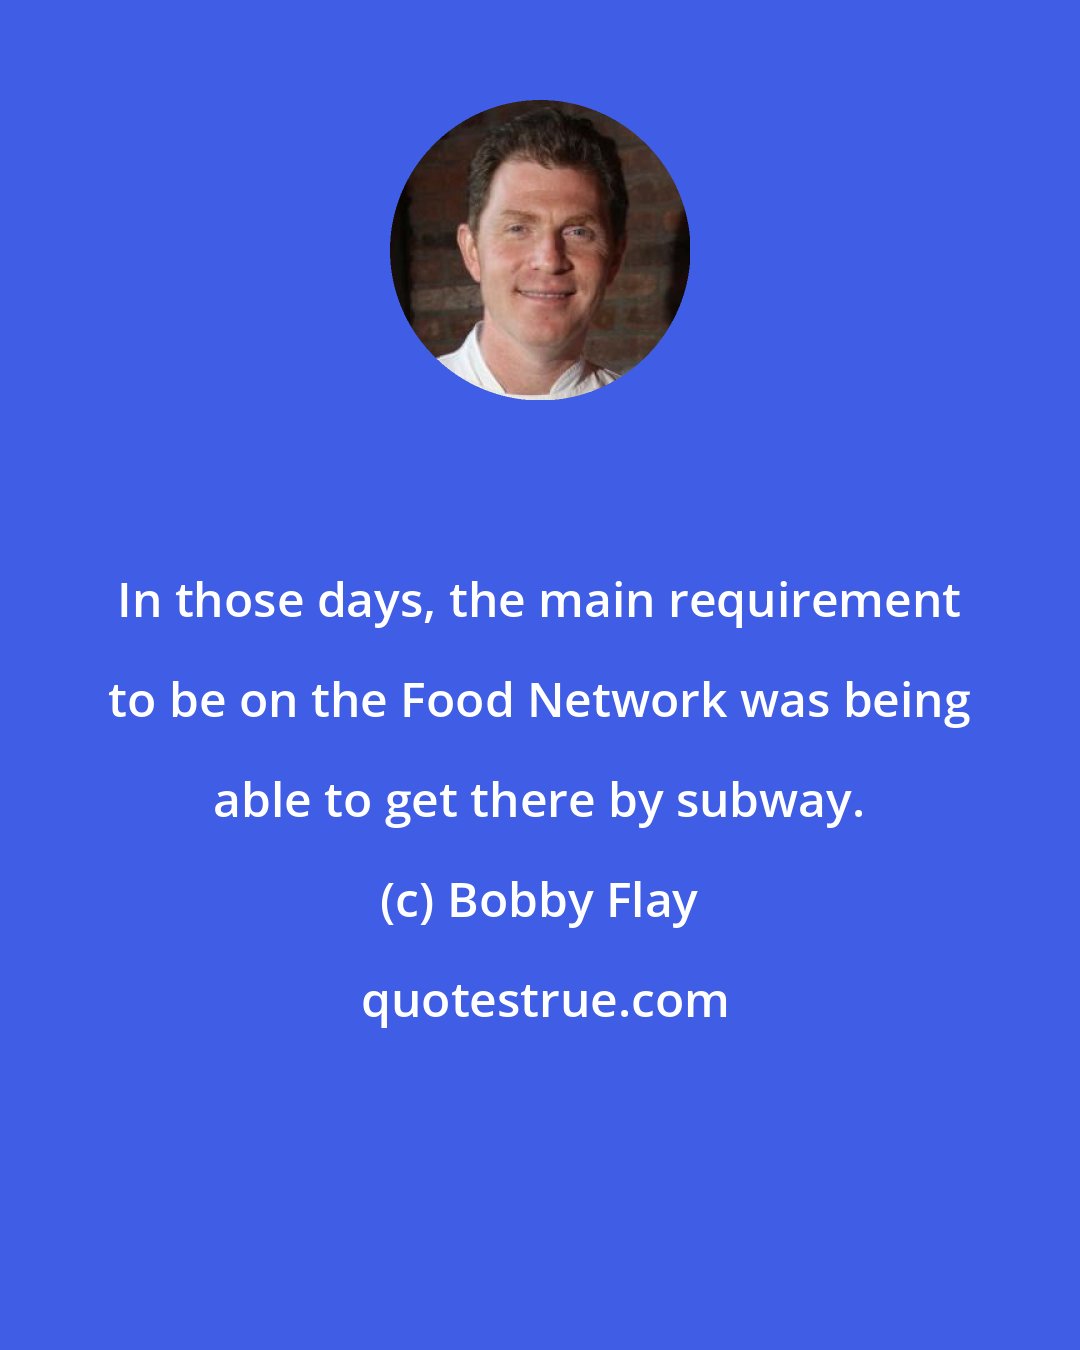 Bobby Flay: In those days, the main requirement to be on the Food Network was being able to get there by subway.